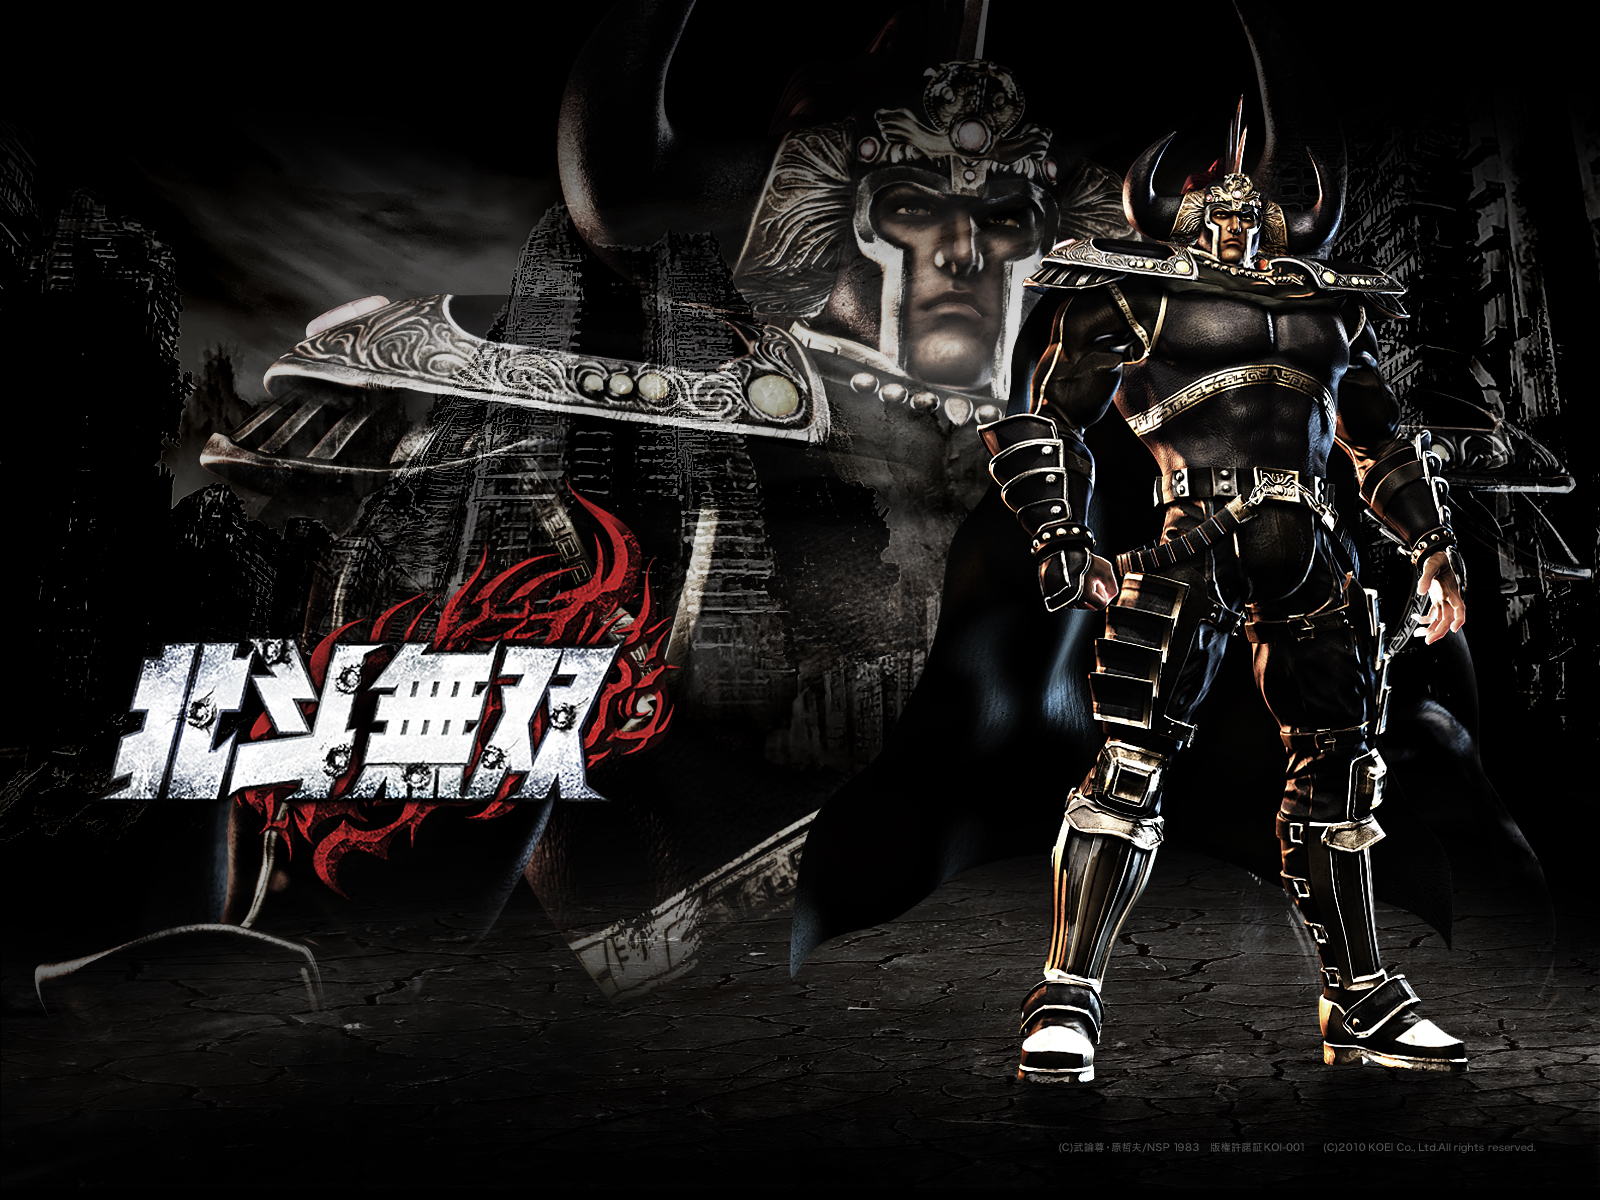 Raoh screenshots, image and picture